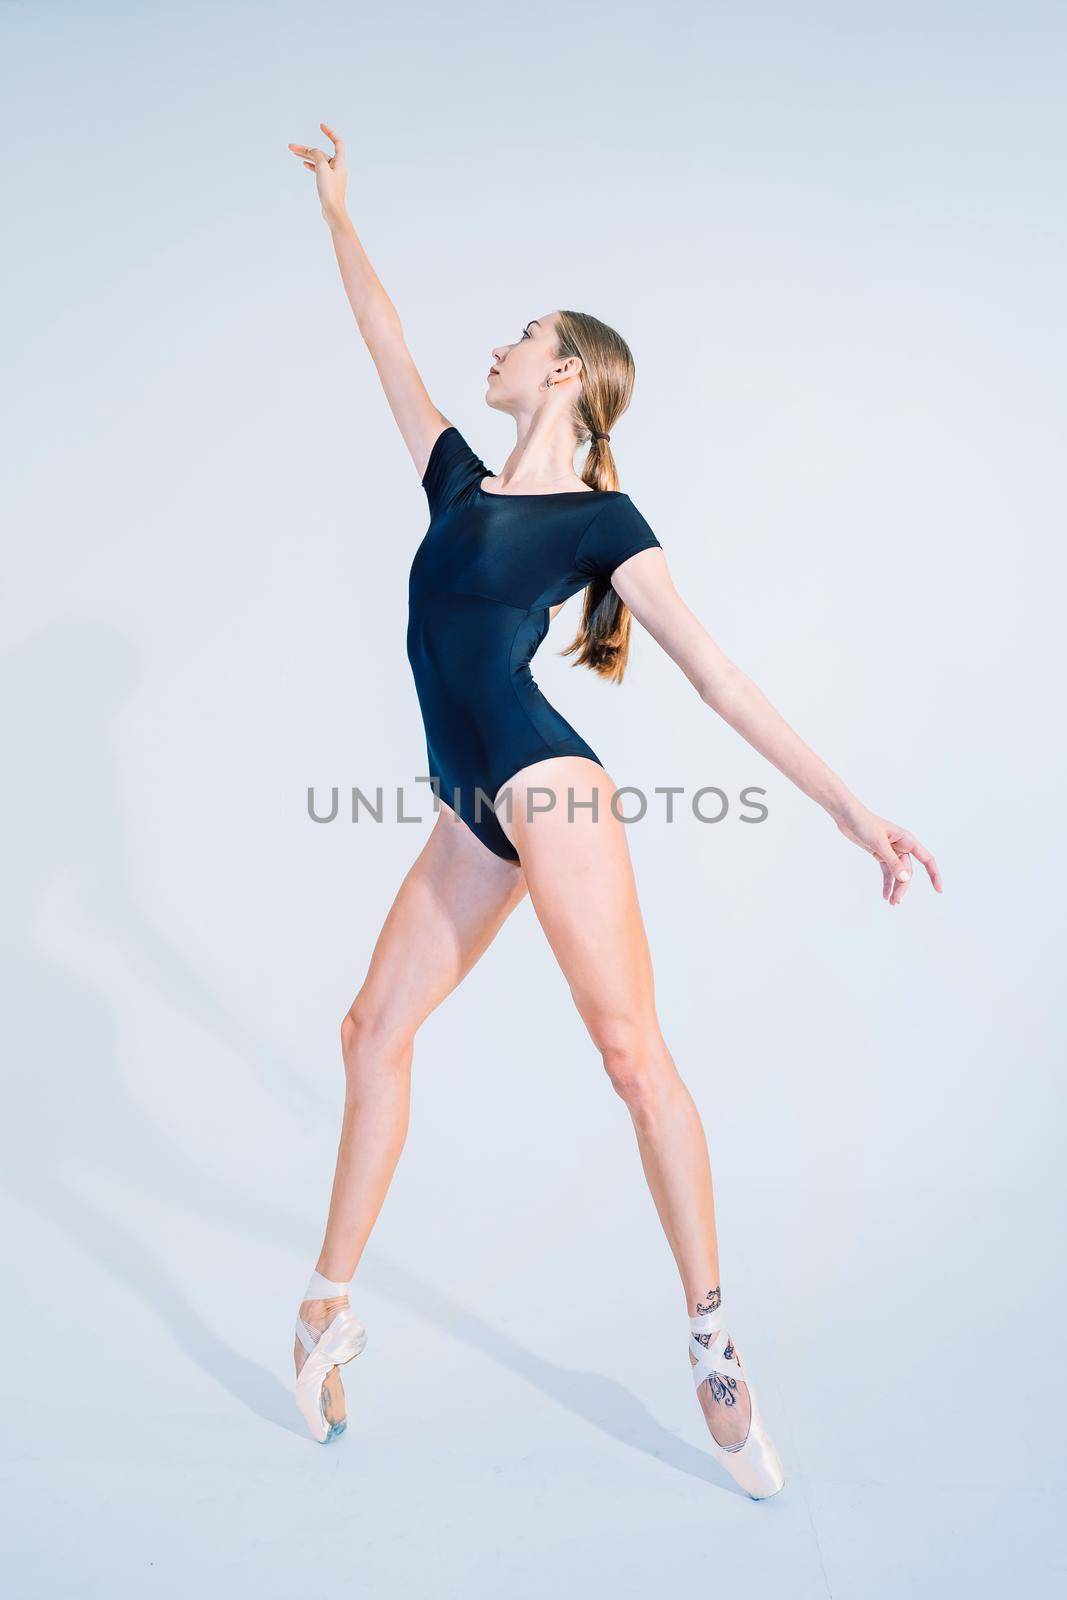 Ballerina in black bodysuit practicing on white studio background. Woman dancing classical pas. Alone warming up before performance. Amazing dance. High quality photo